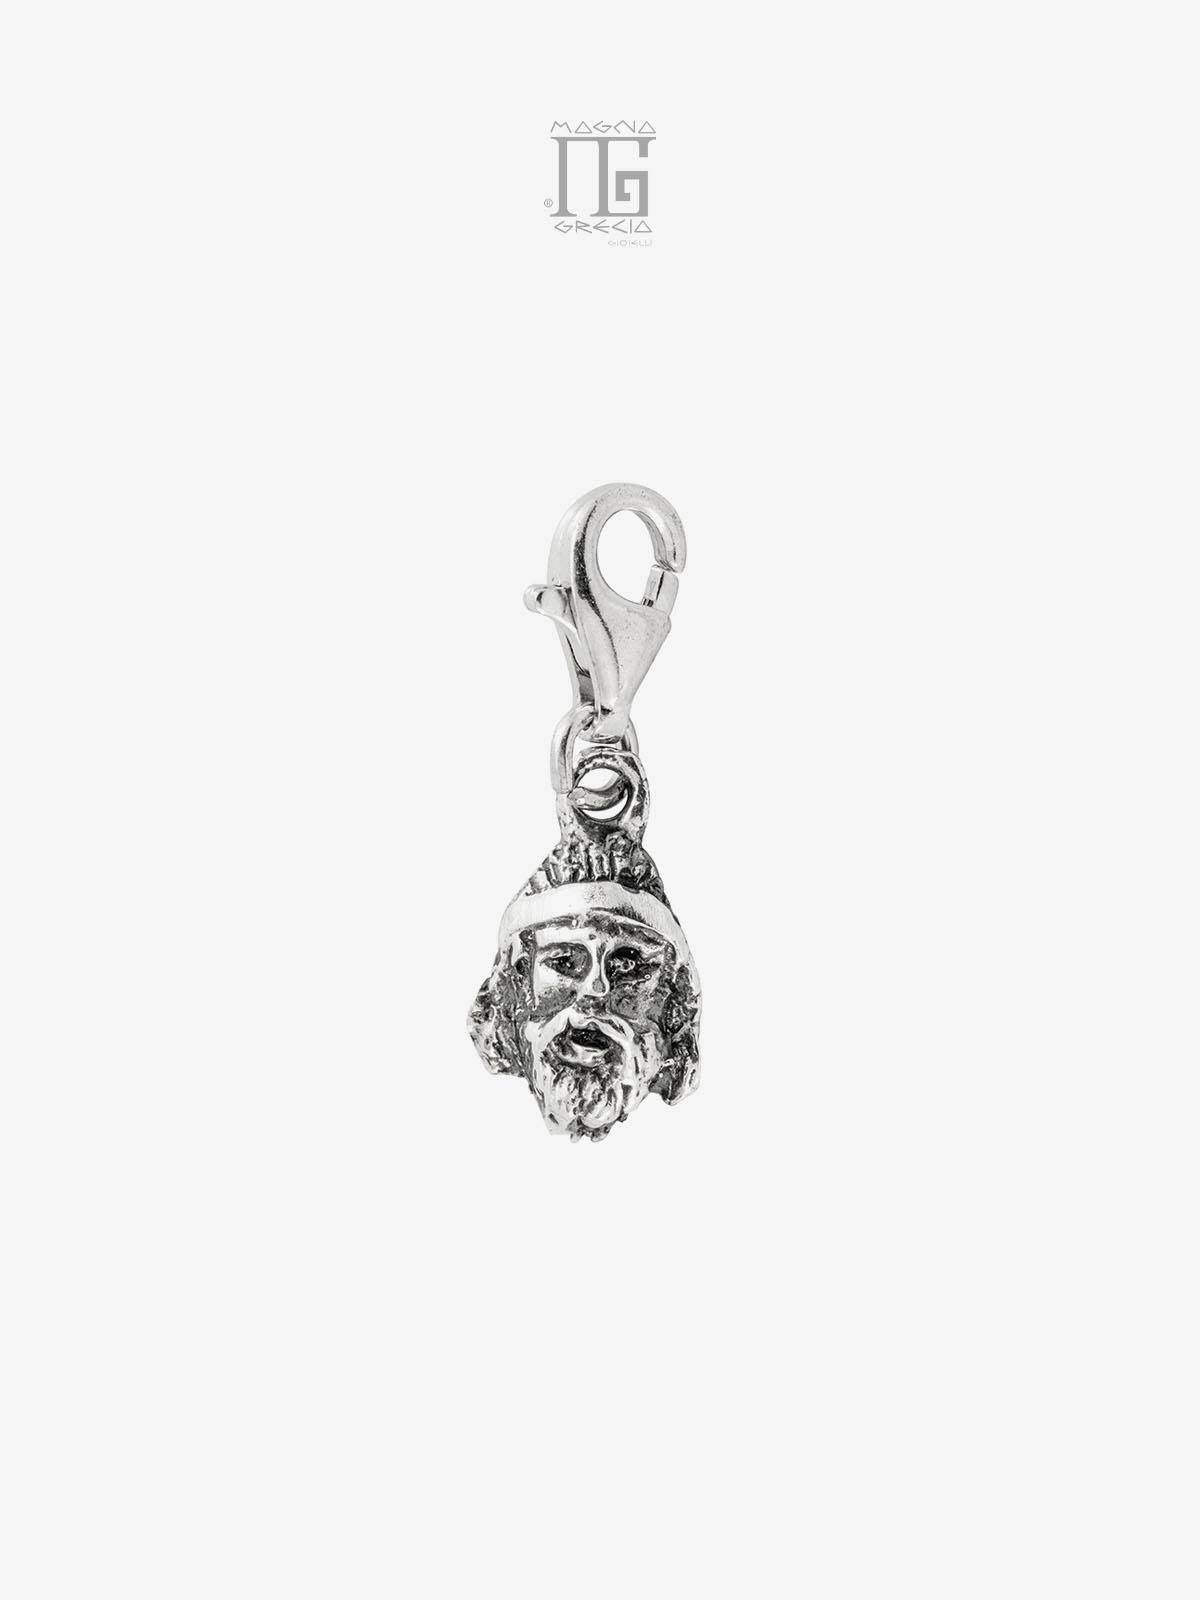 Silver charm depicting the face of the Riace Bronze A Cod. MGK 3704 V-63